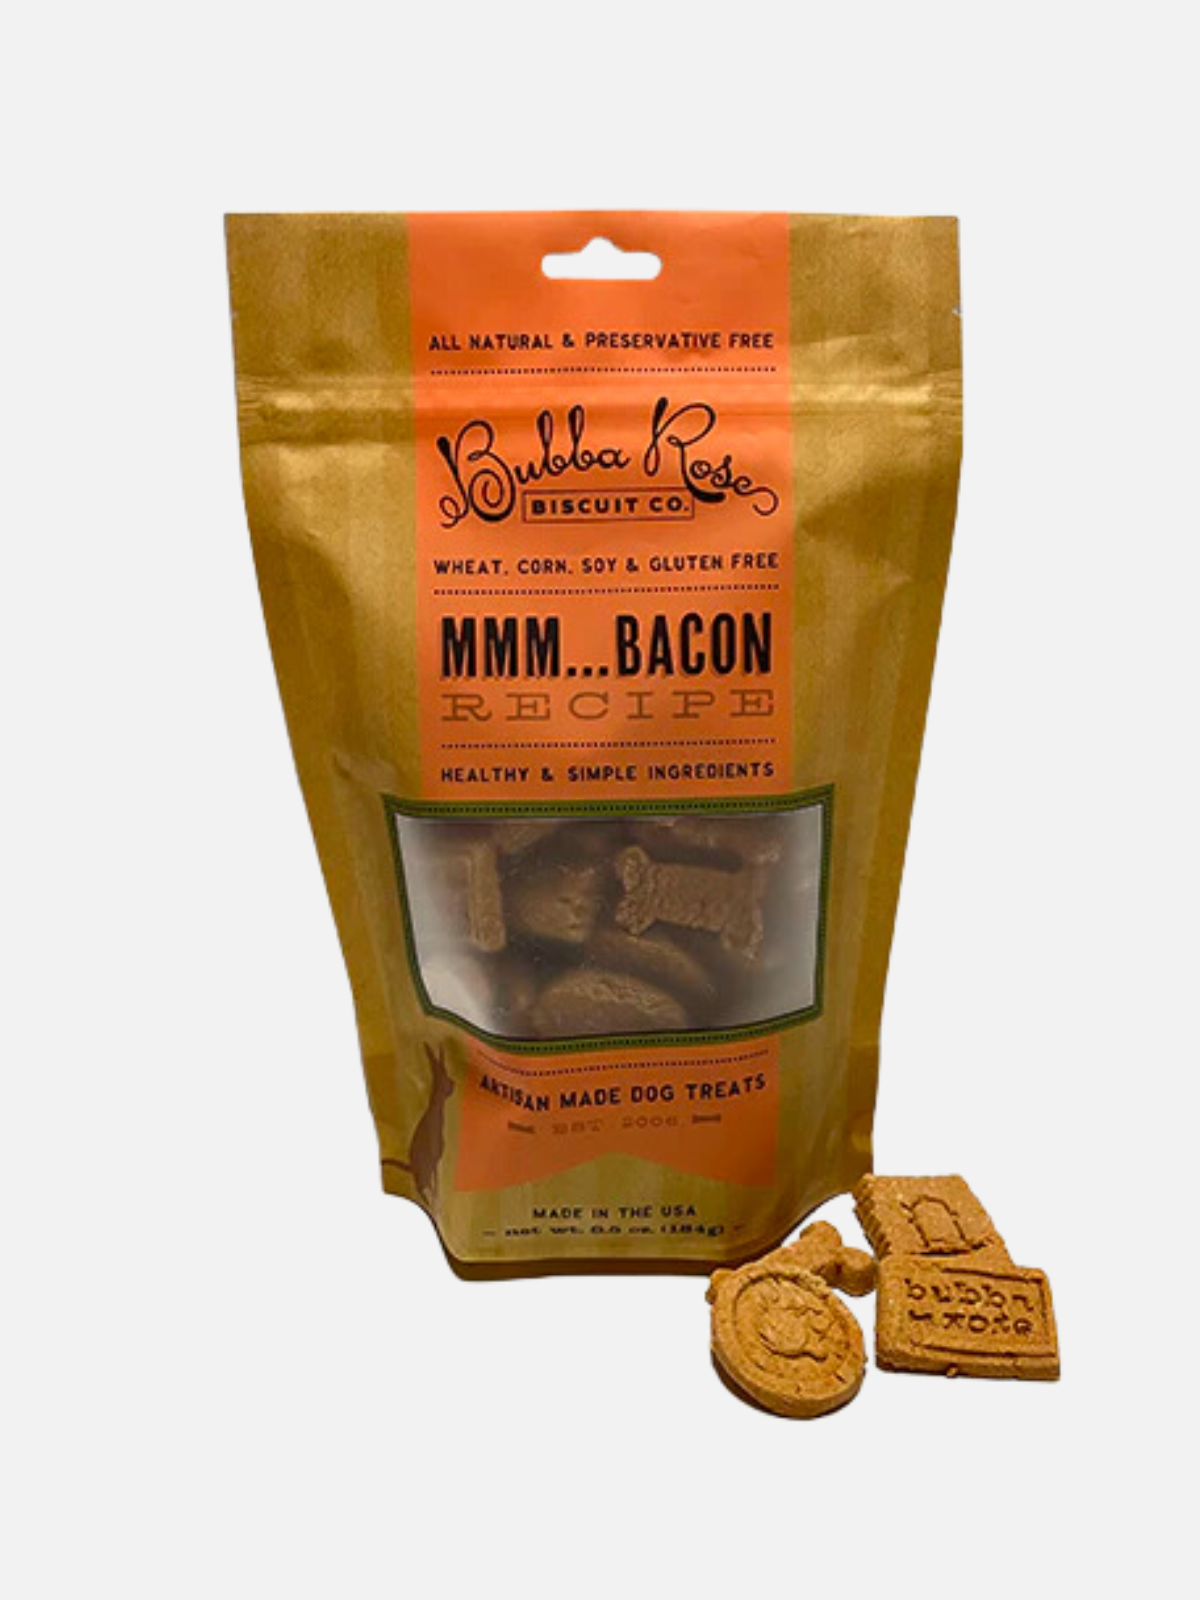 bubba rose biscuit company dog biscuit bag bacon peanut butter pizza crust all star assorted flavors vegetarian treats kempt athens ga georgia men's clothing store